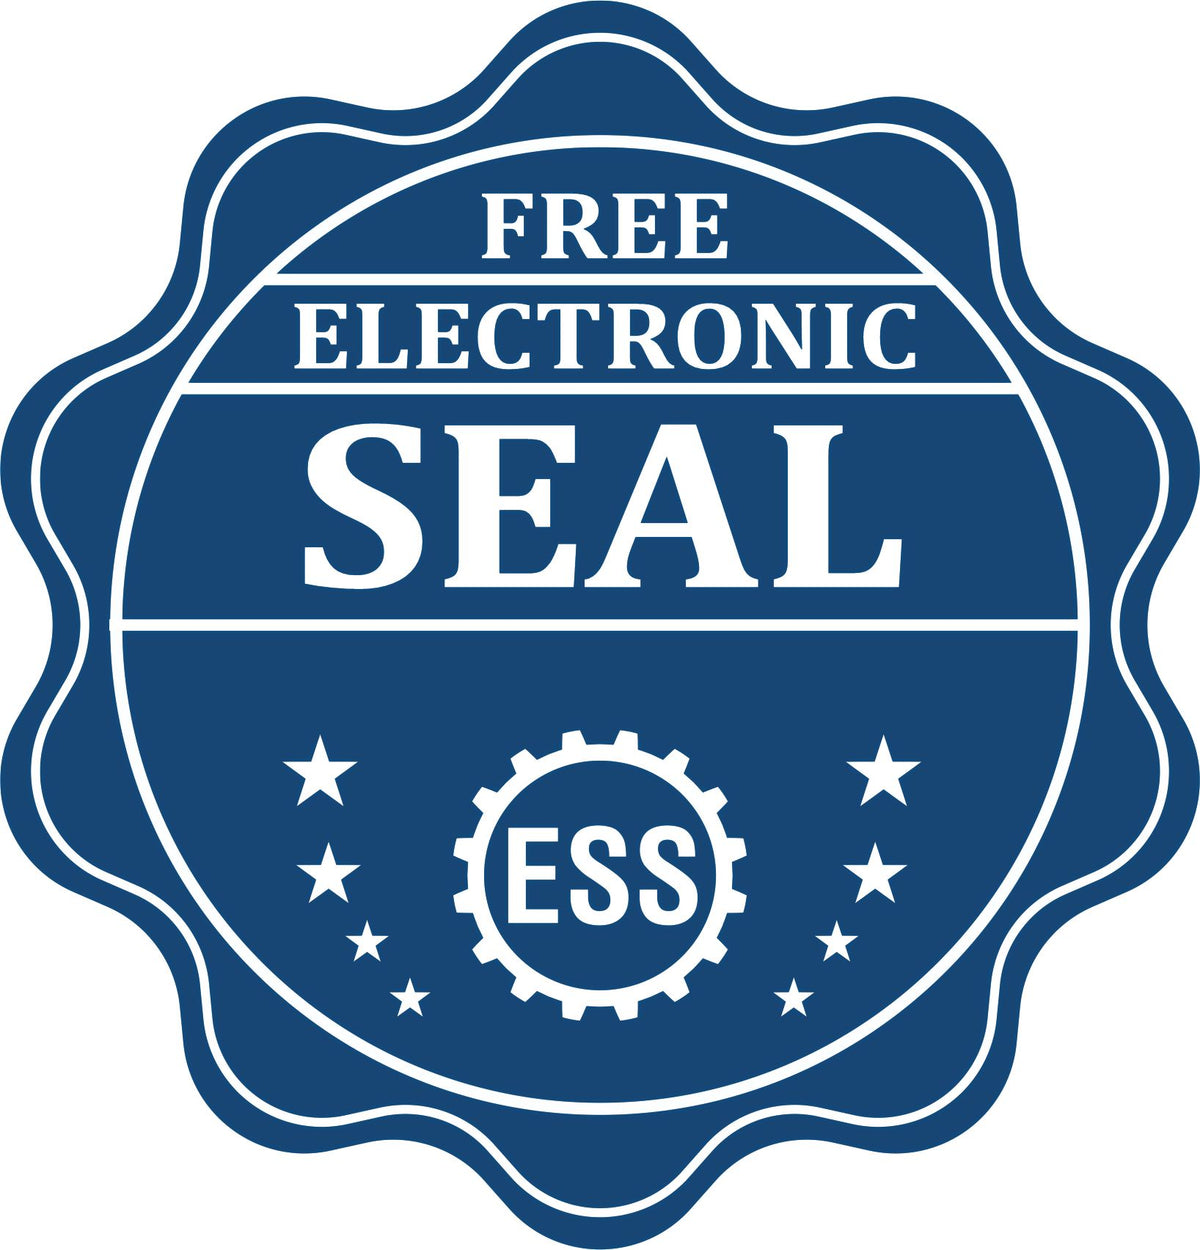 A badge showing a free electronic seal for the Slim Pre-Inked Nebraska Architect Seal Stamp with stars and the ESS gear on the emblem.